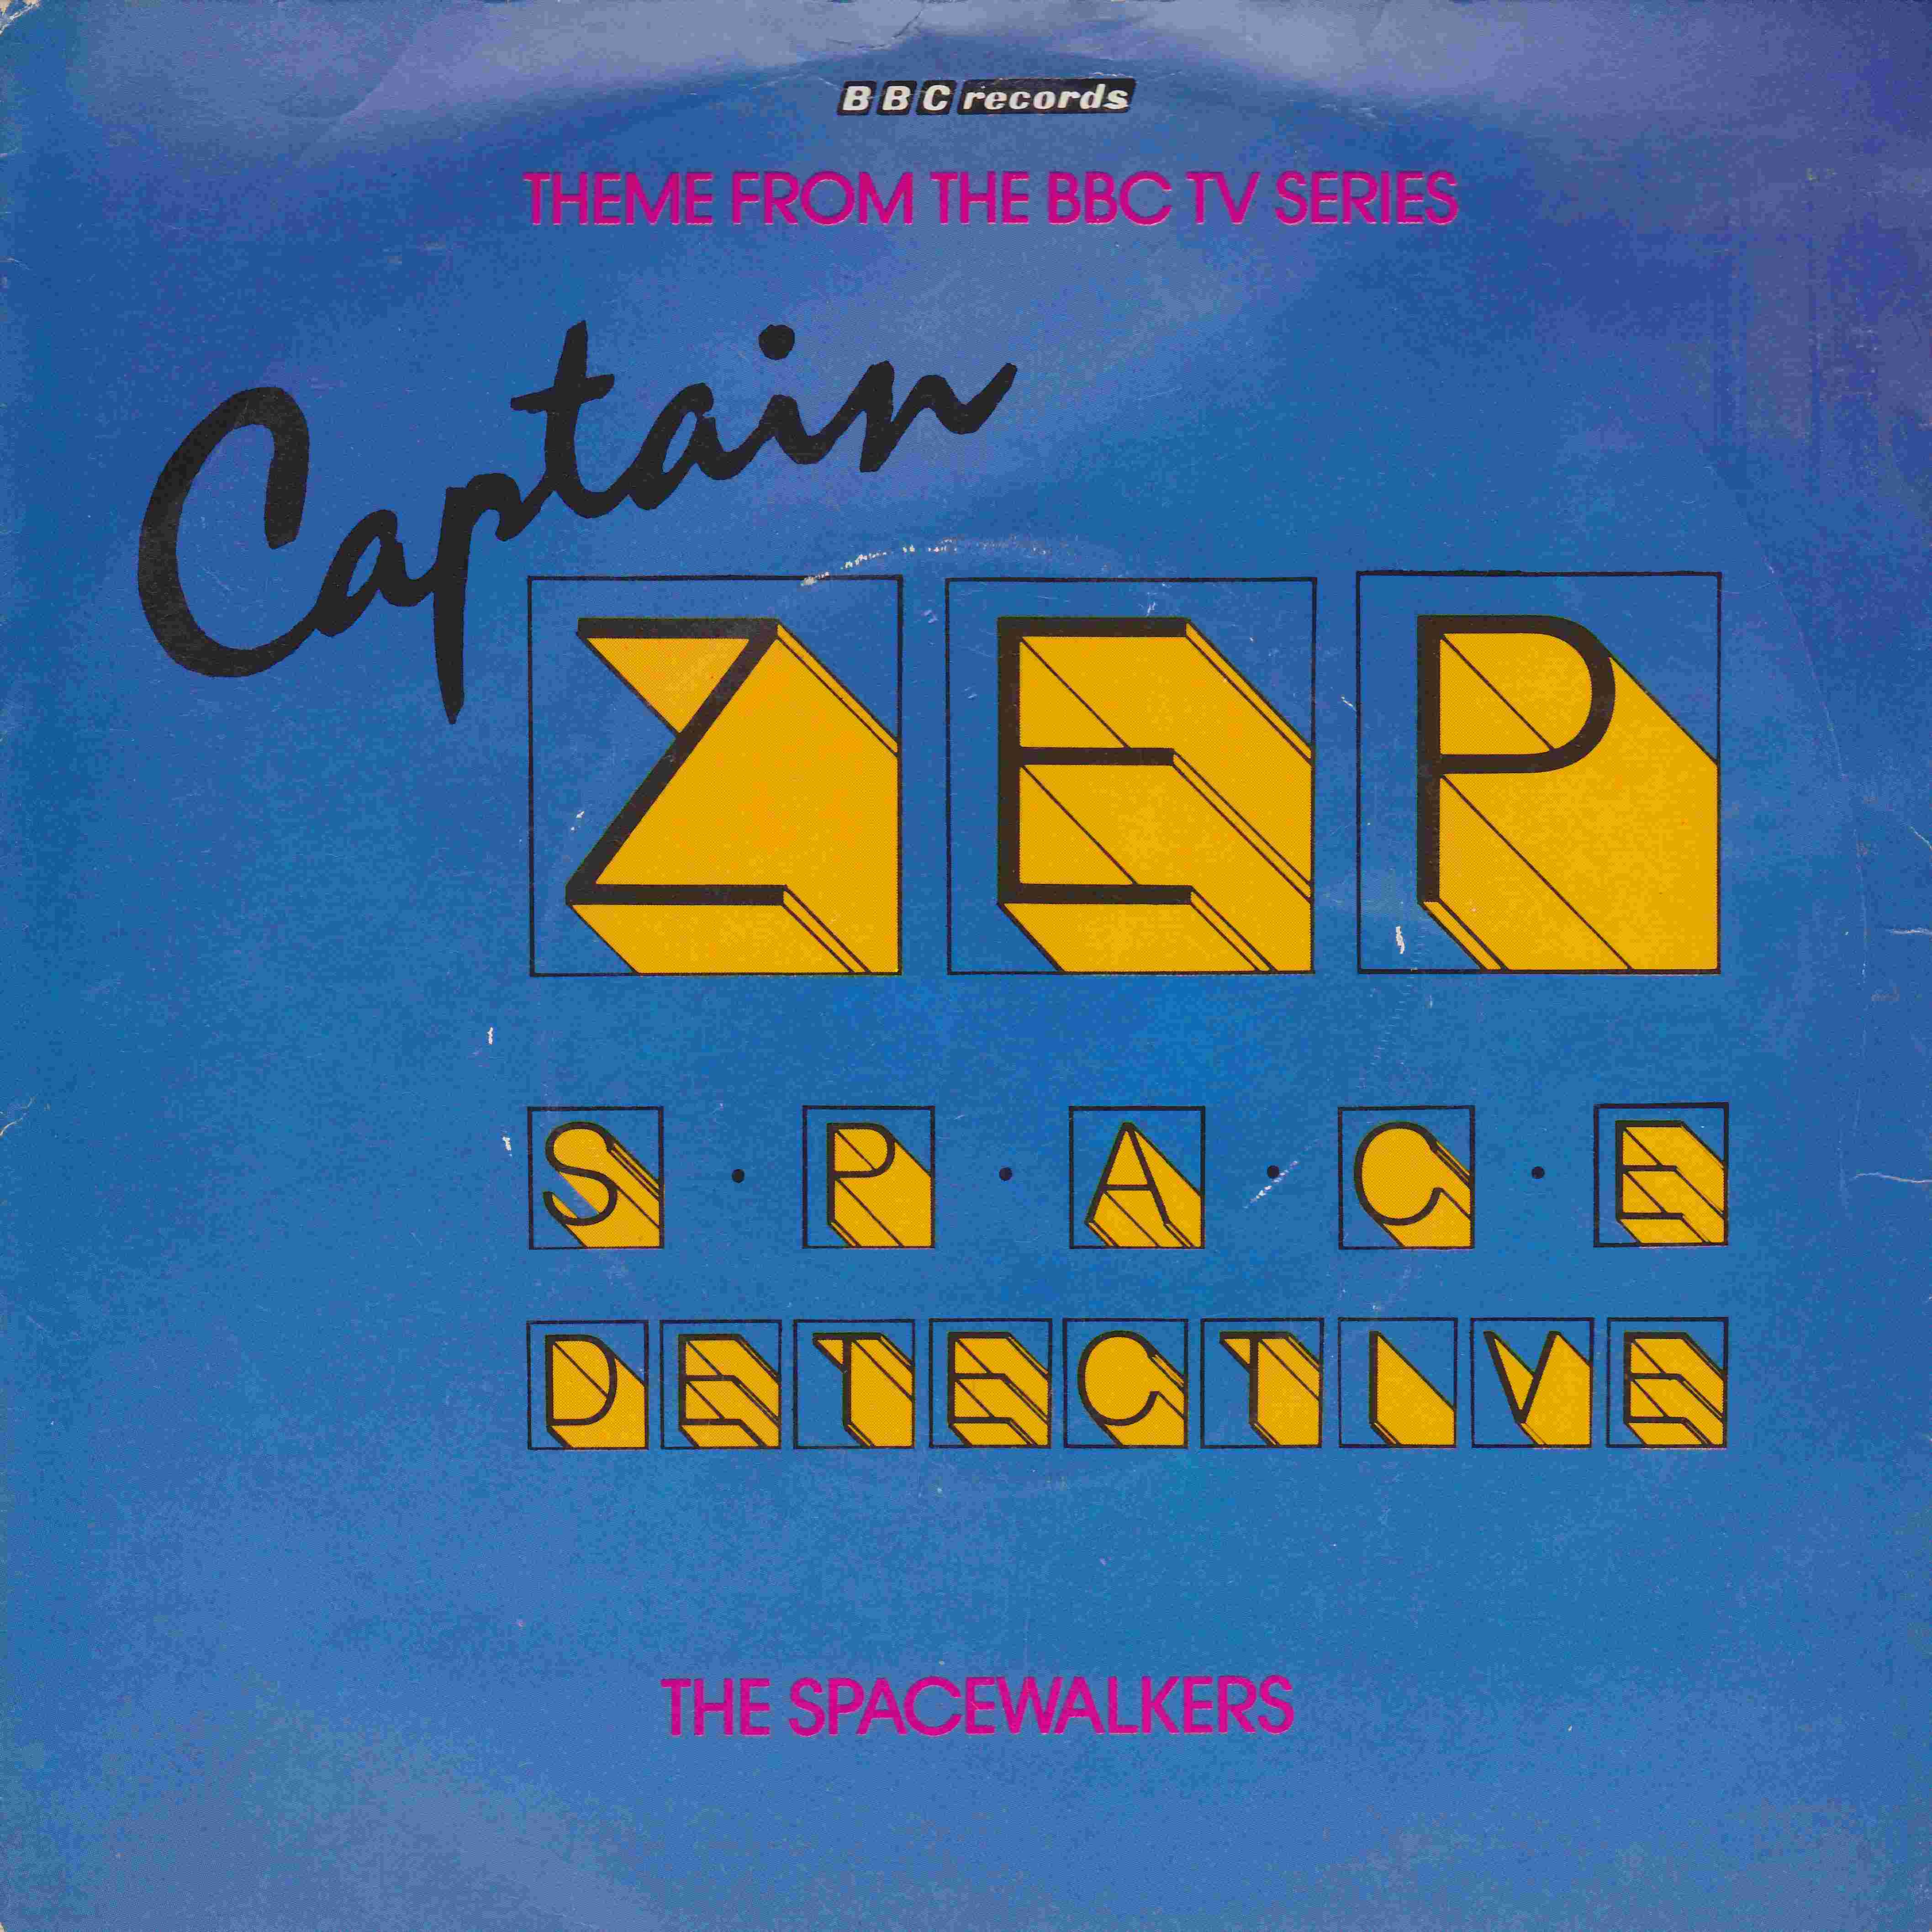 Picture of RESL 127 Captain Zep by artist David Smith / Paul Aitken from the BBC singles - Records and Tapes library